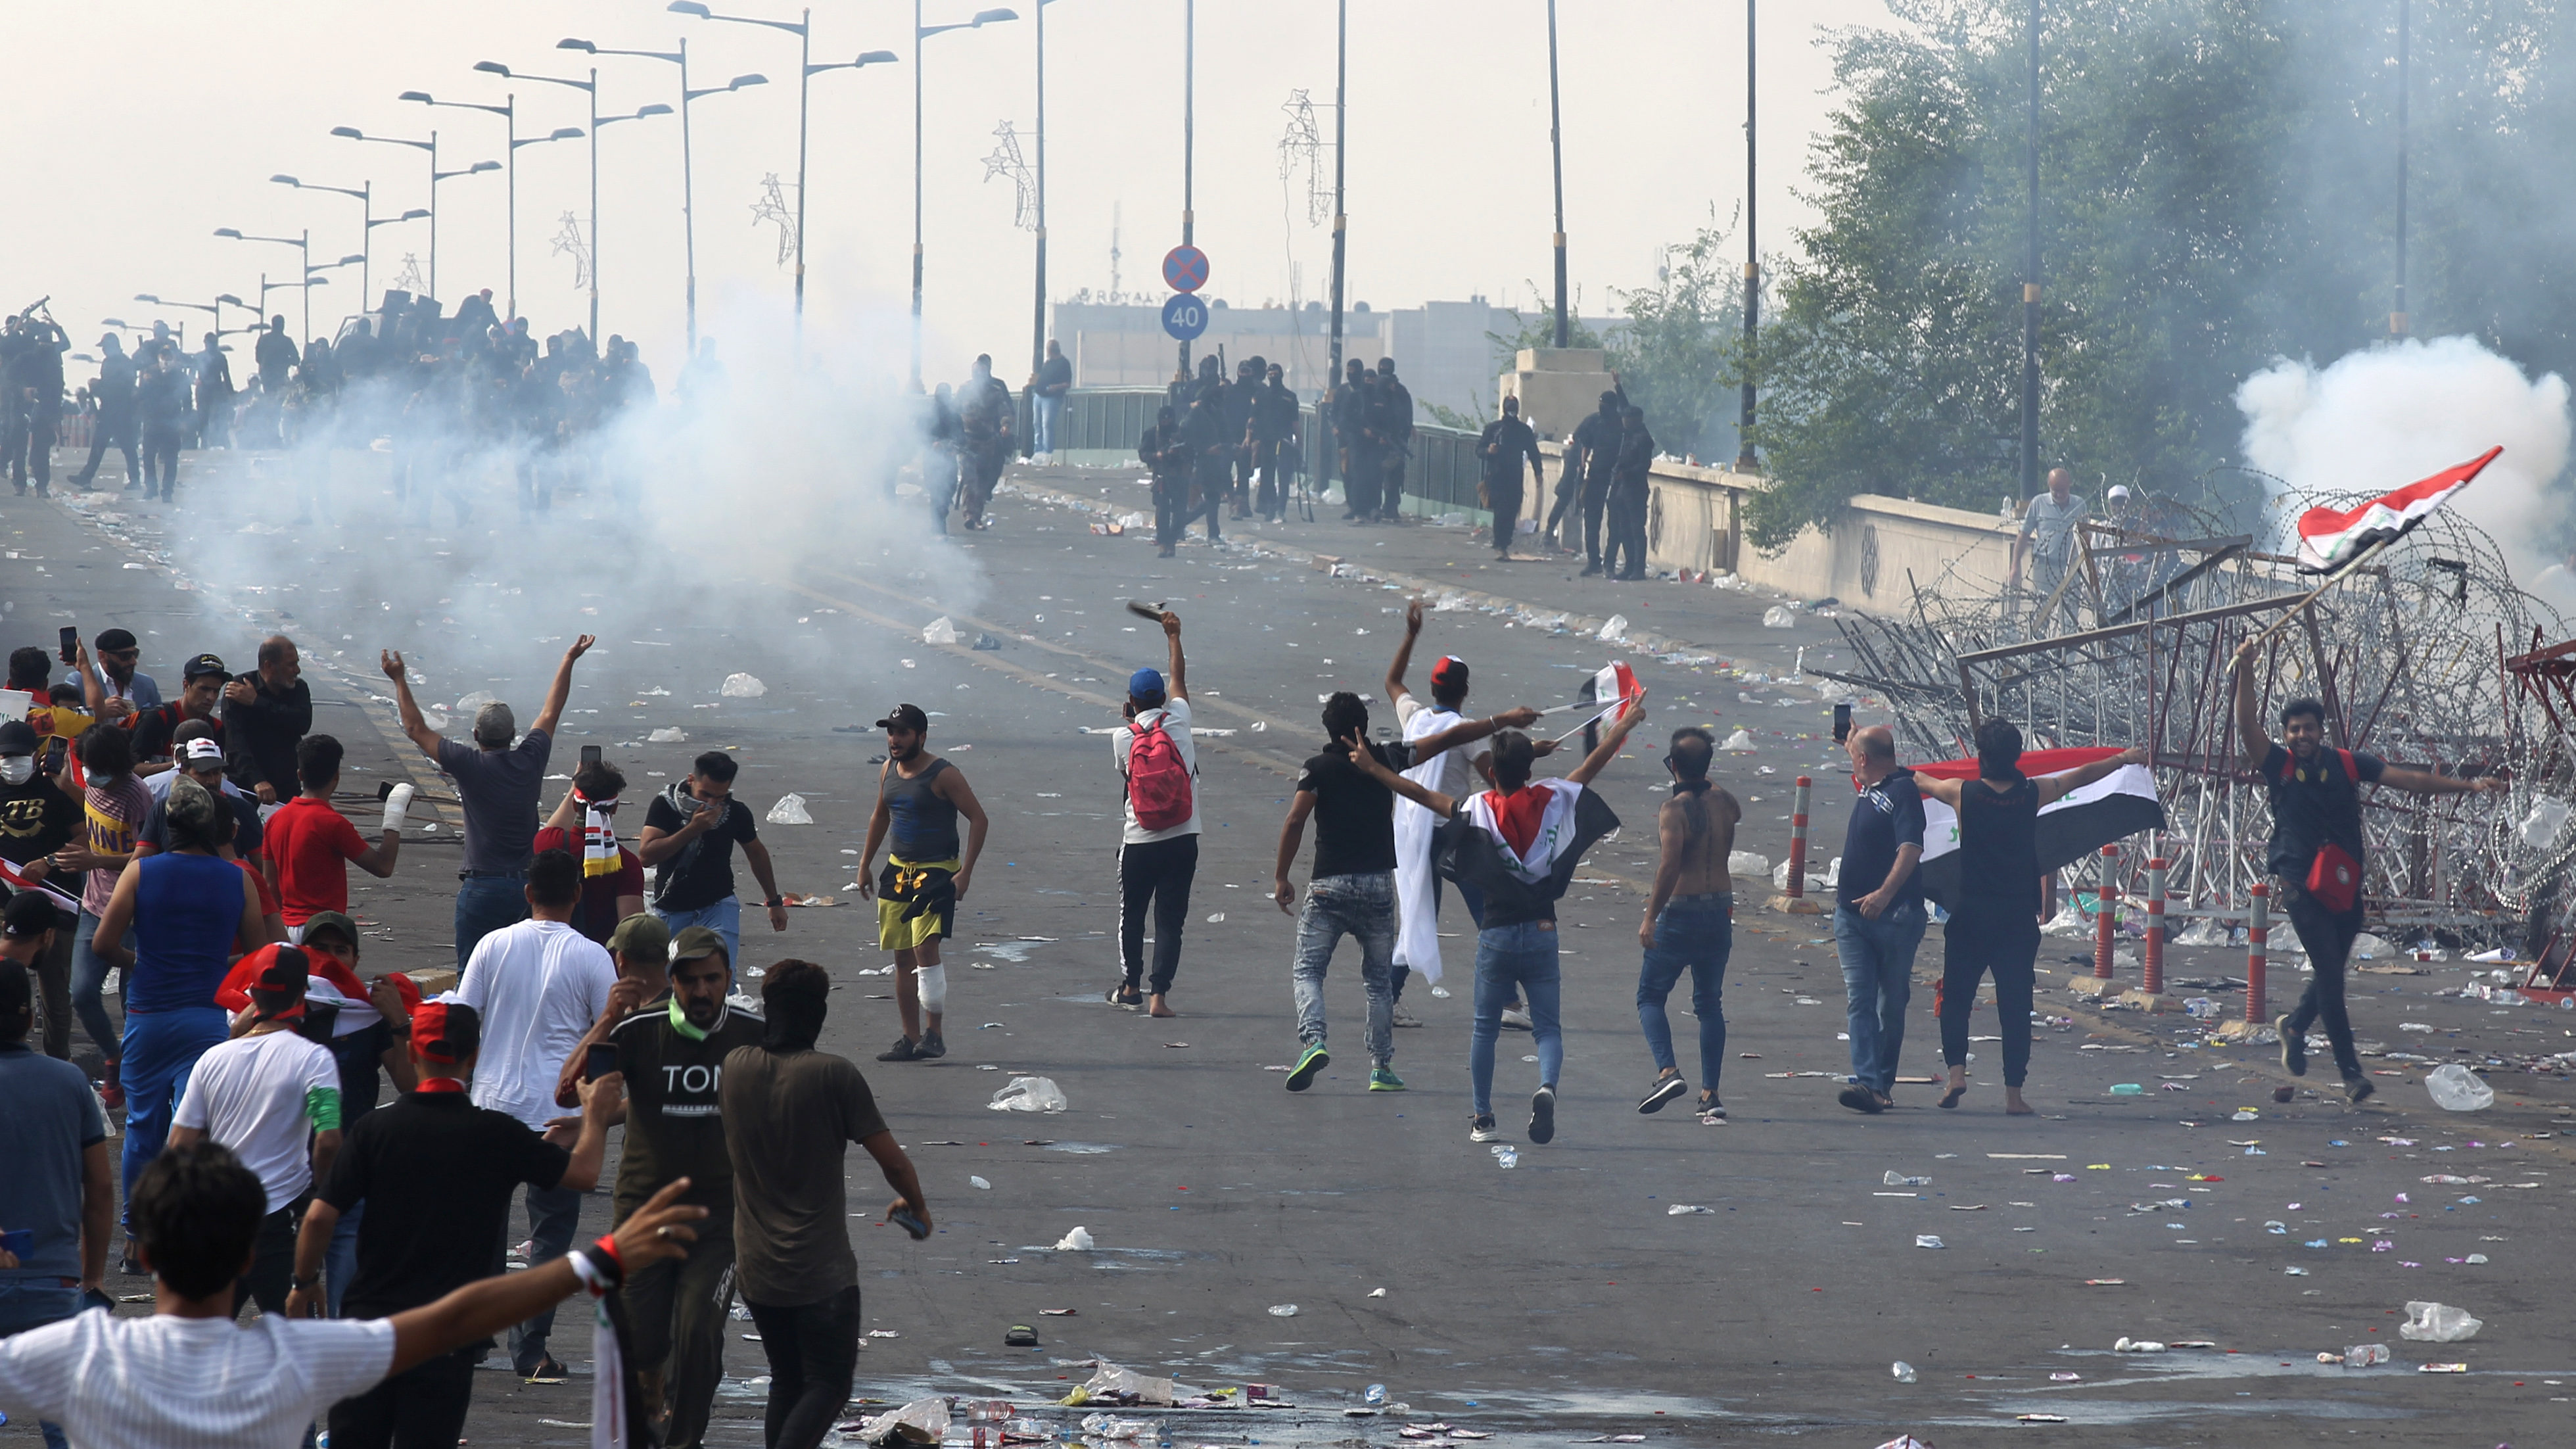 Iraqis Renew Protests following Report on Government’s Previous Response